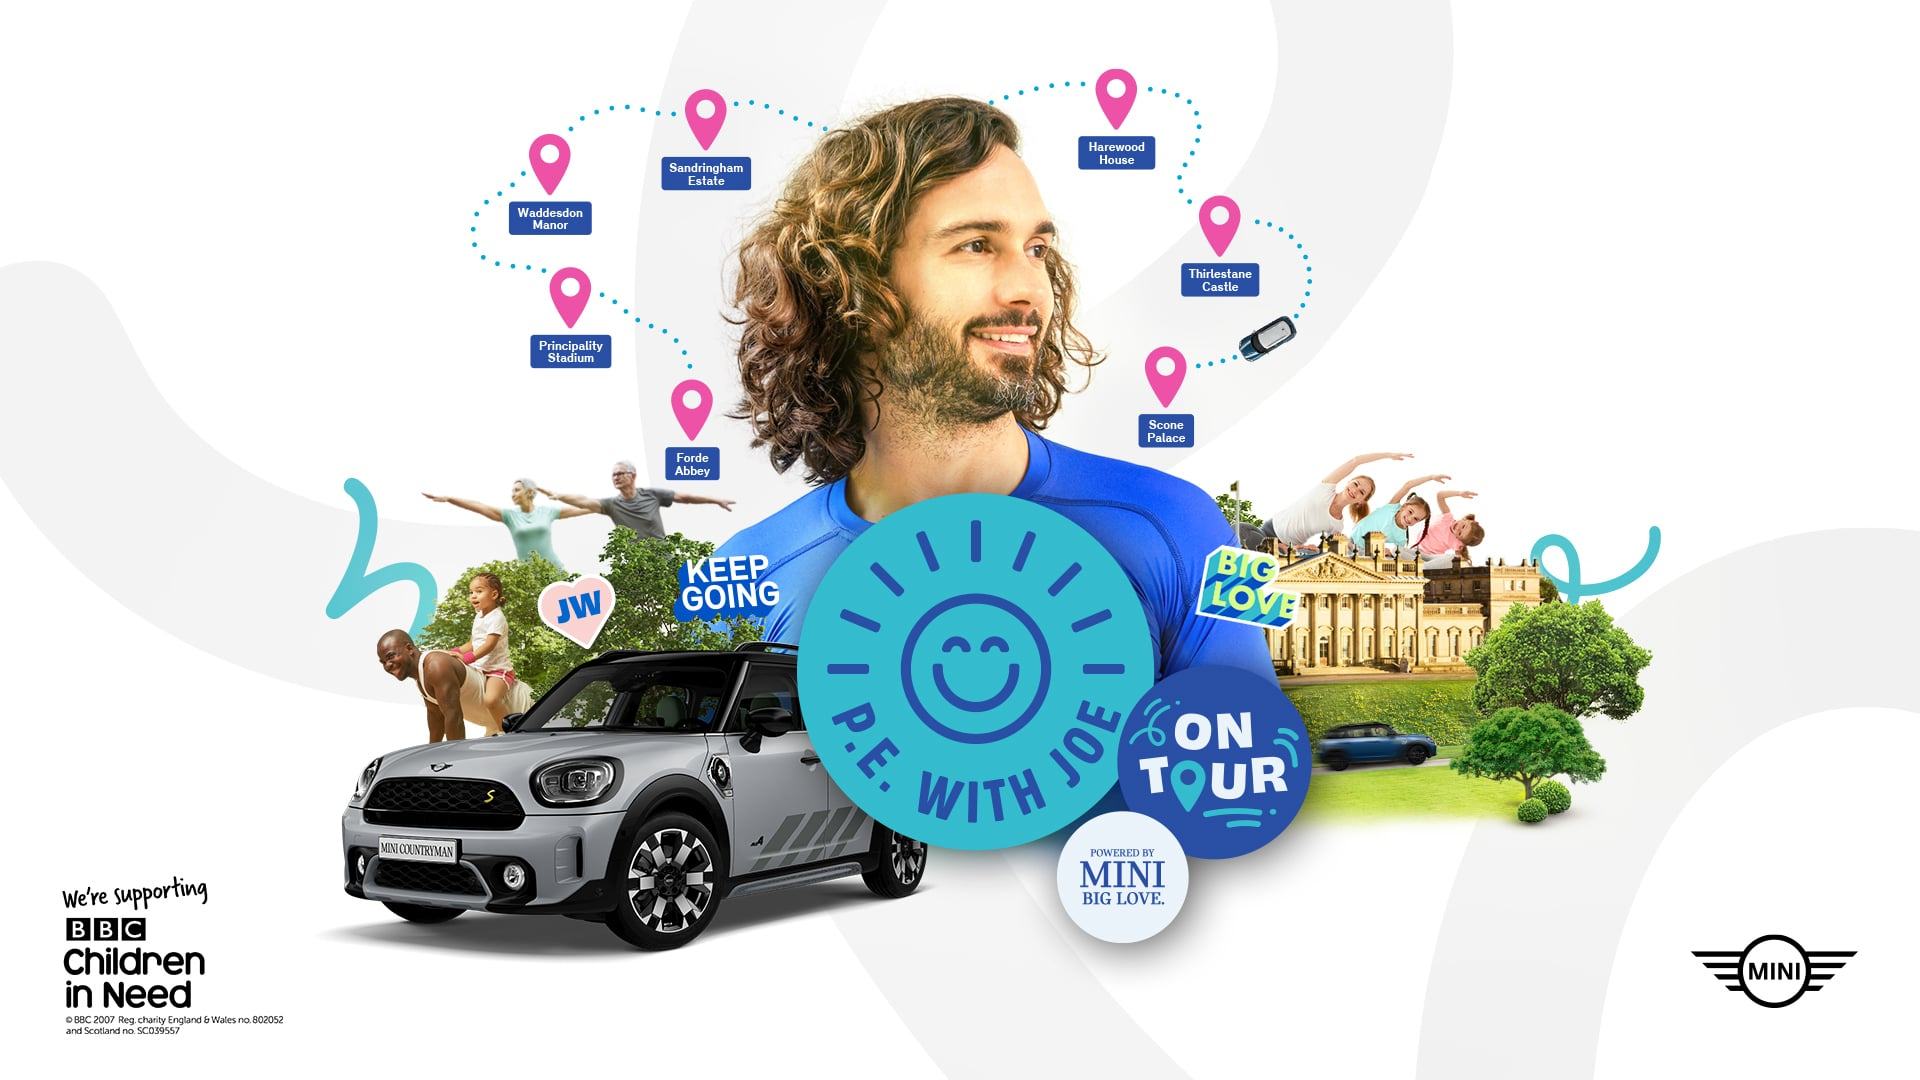 Image name joe wicks on tour mini big love children in need the 2 image from the post Joe Wicks will be at Harewood House in Yorkshire in Yorkshire.com.